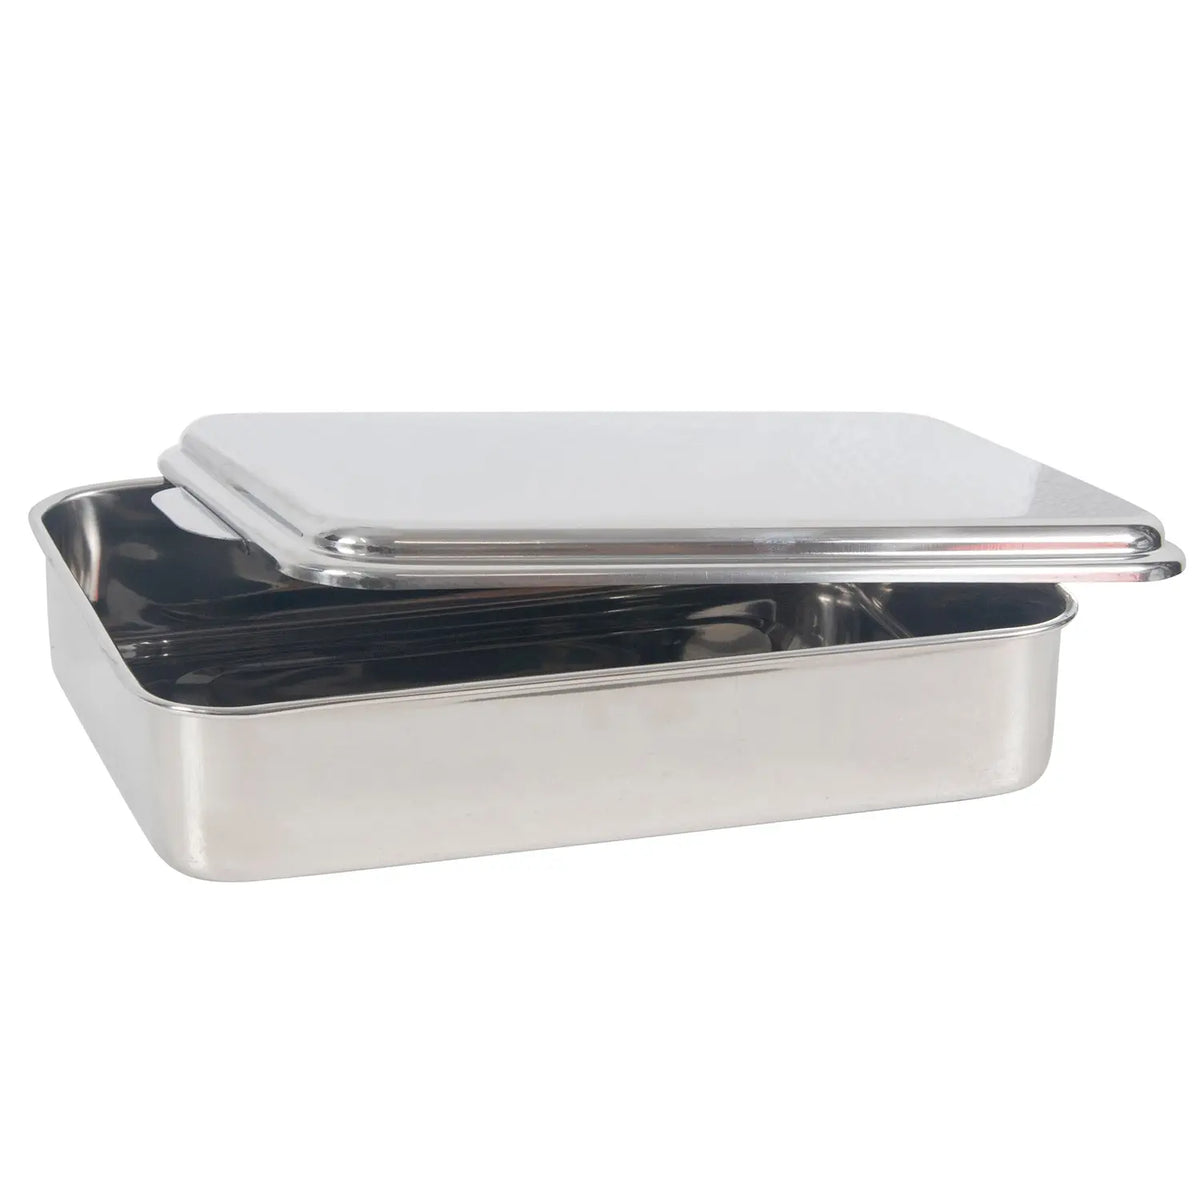 Personalized Cake Pans, Aluminum Cake Pan with Lid